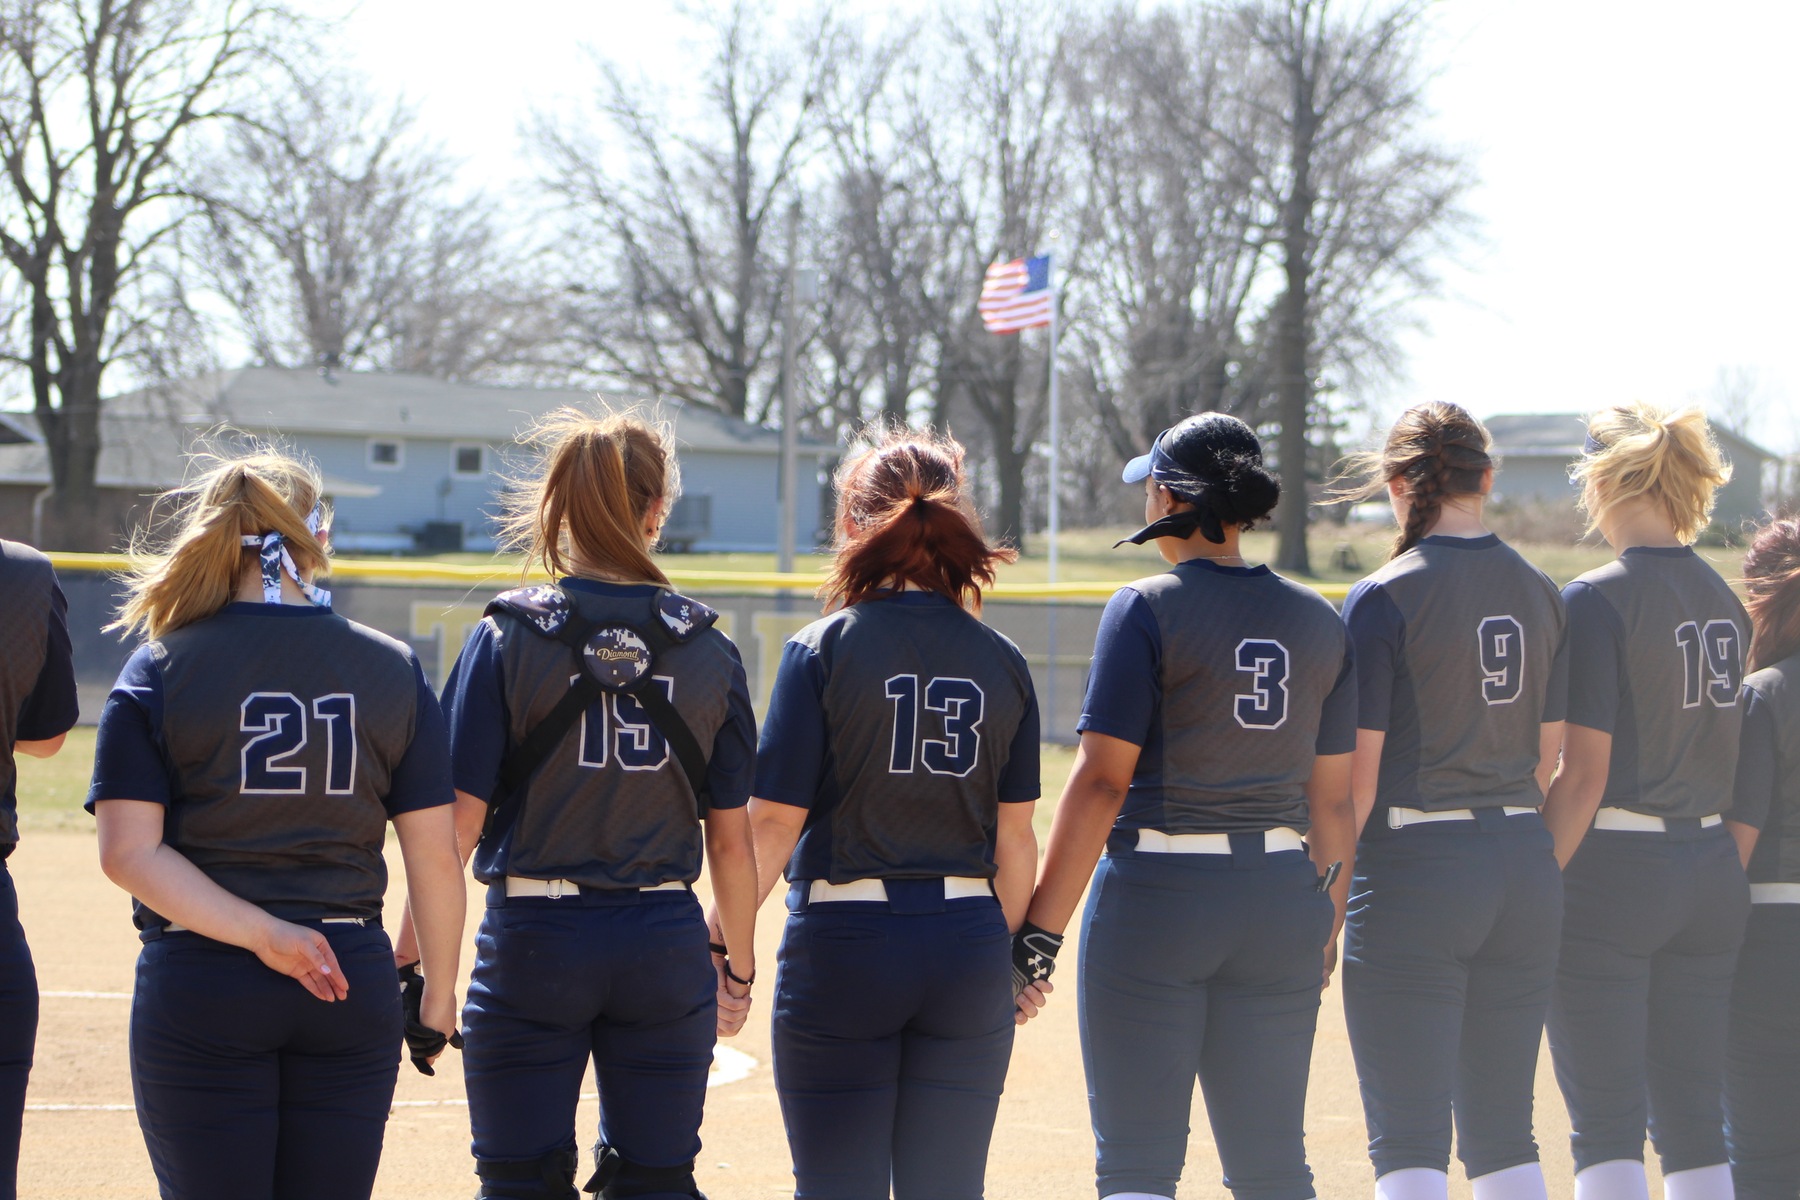 The MCC softball team dropped its opening game of the Region XI Tournament to top-seeded Indian Hills on Monday